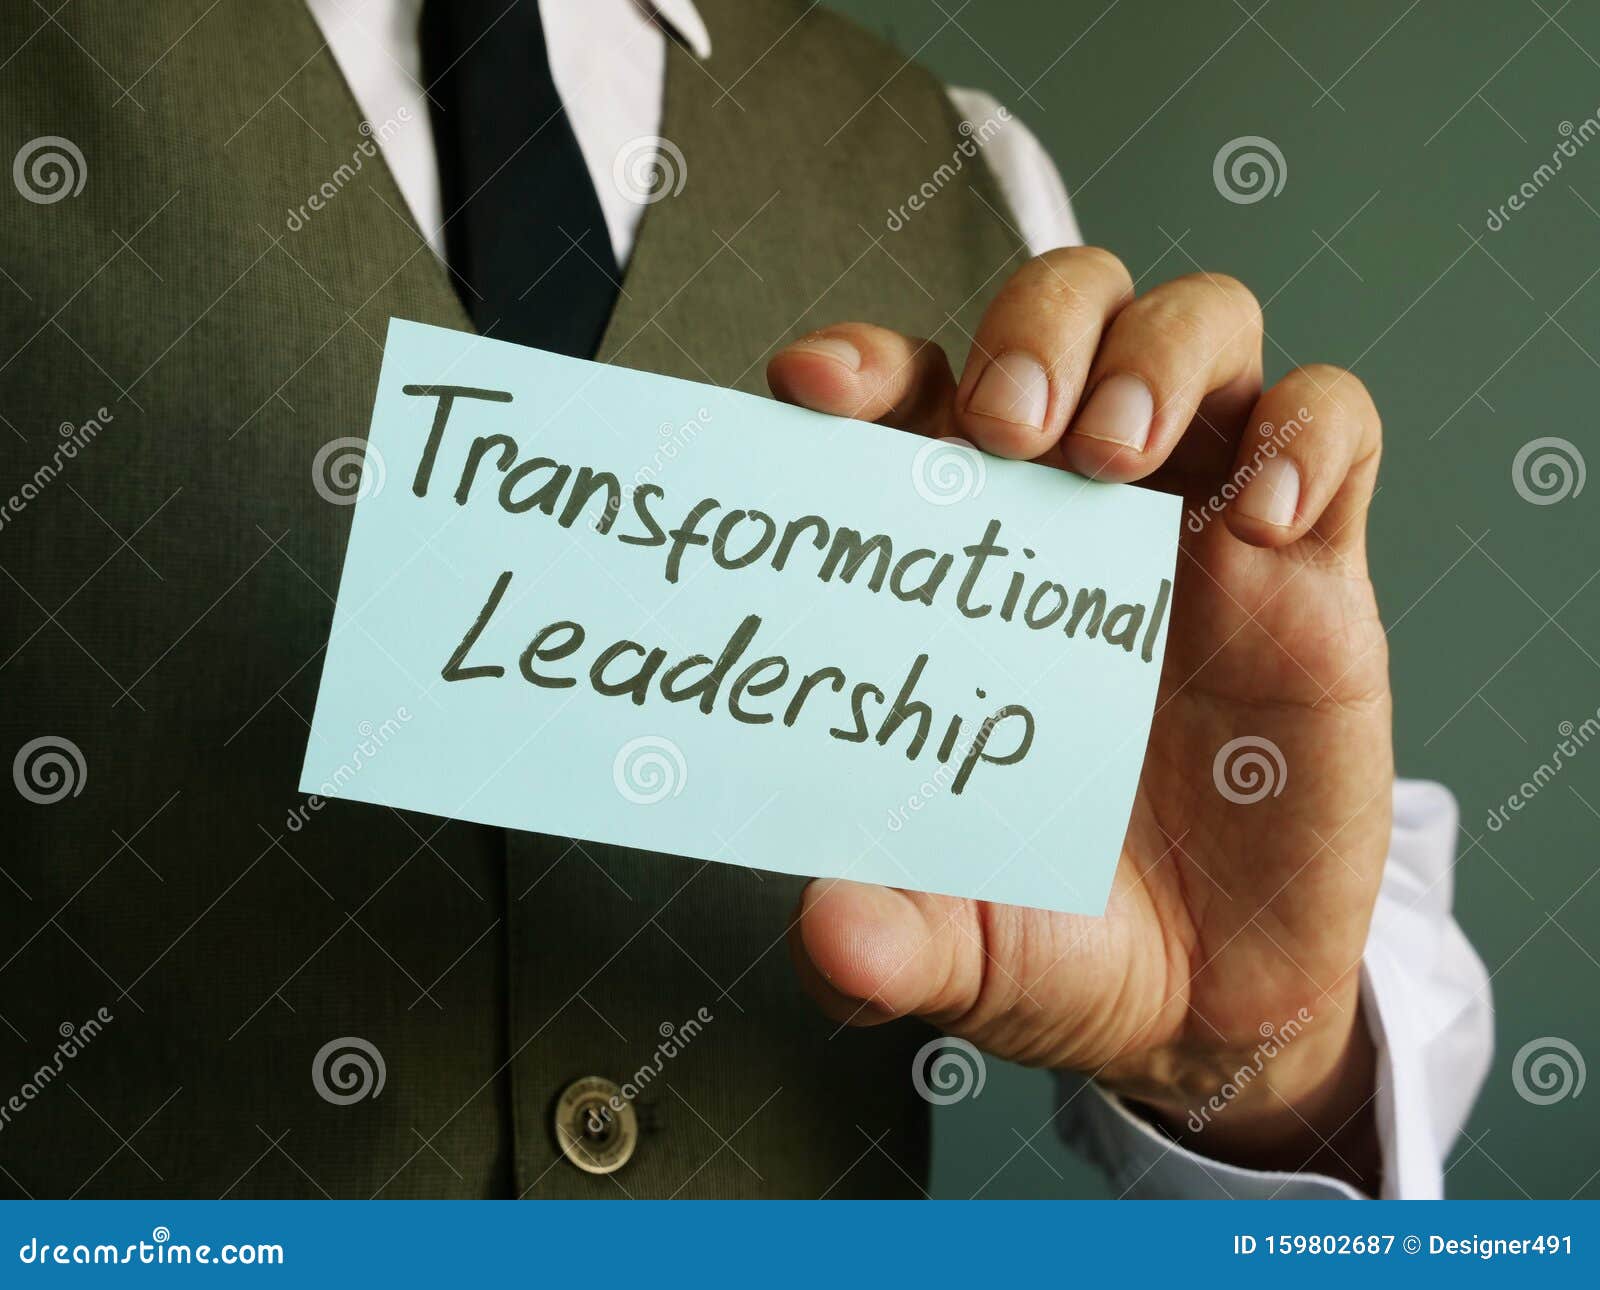 transformational leadership sign on the page